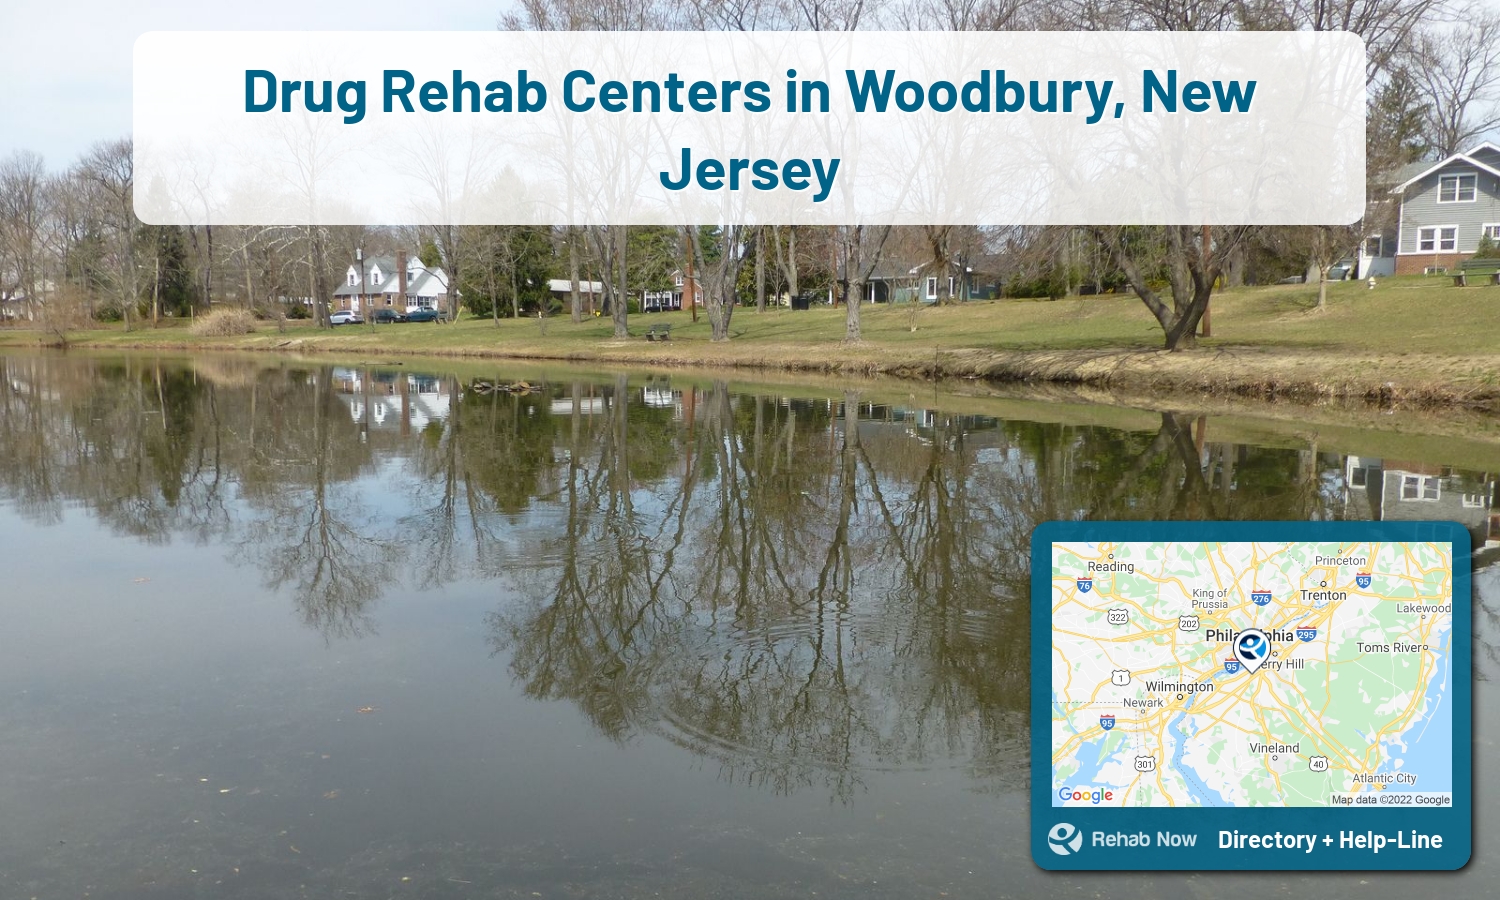 Woodbury, NJ Treatment Centers. Find drug rehab in Woodbury, New Jersey, or detox and treatment programs. Get the right help now!